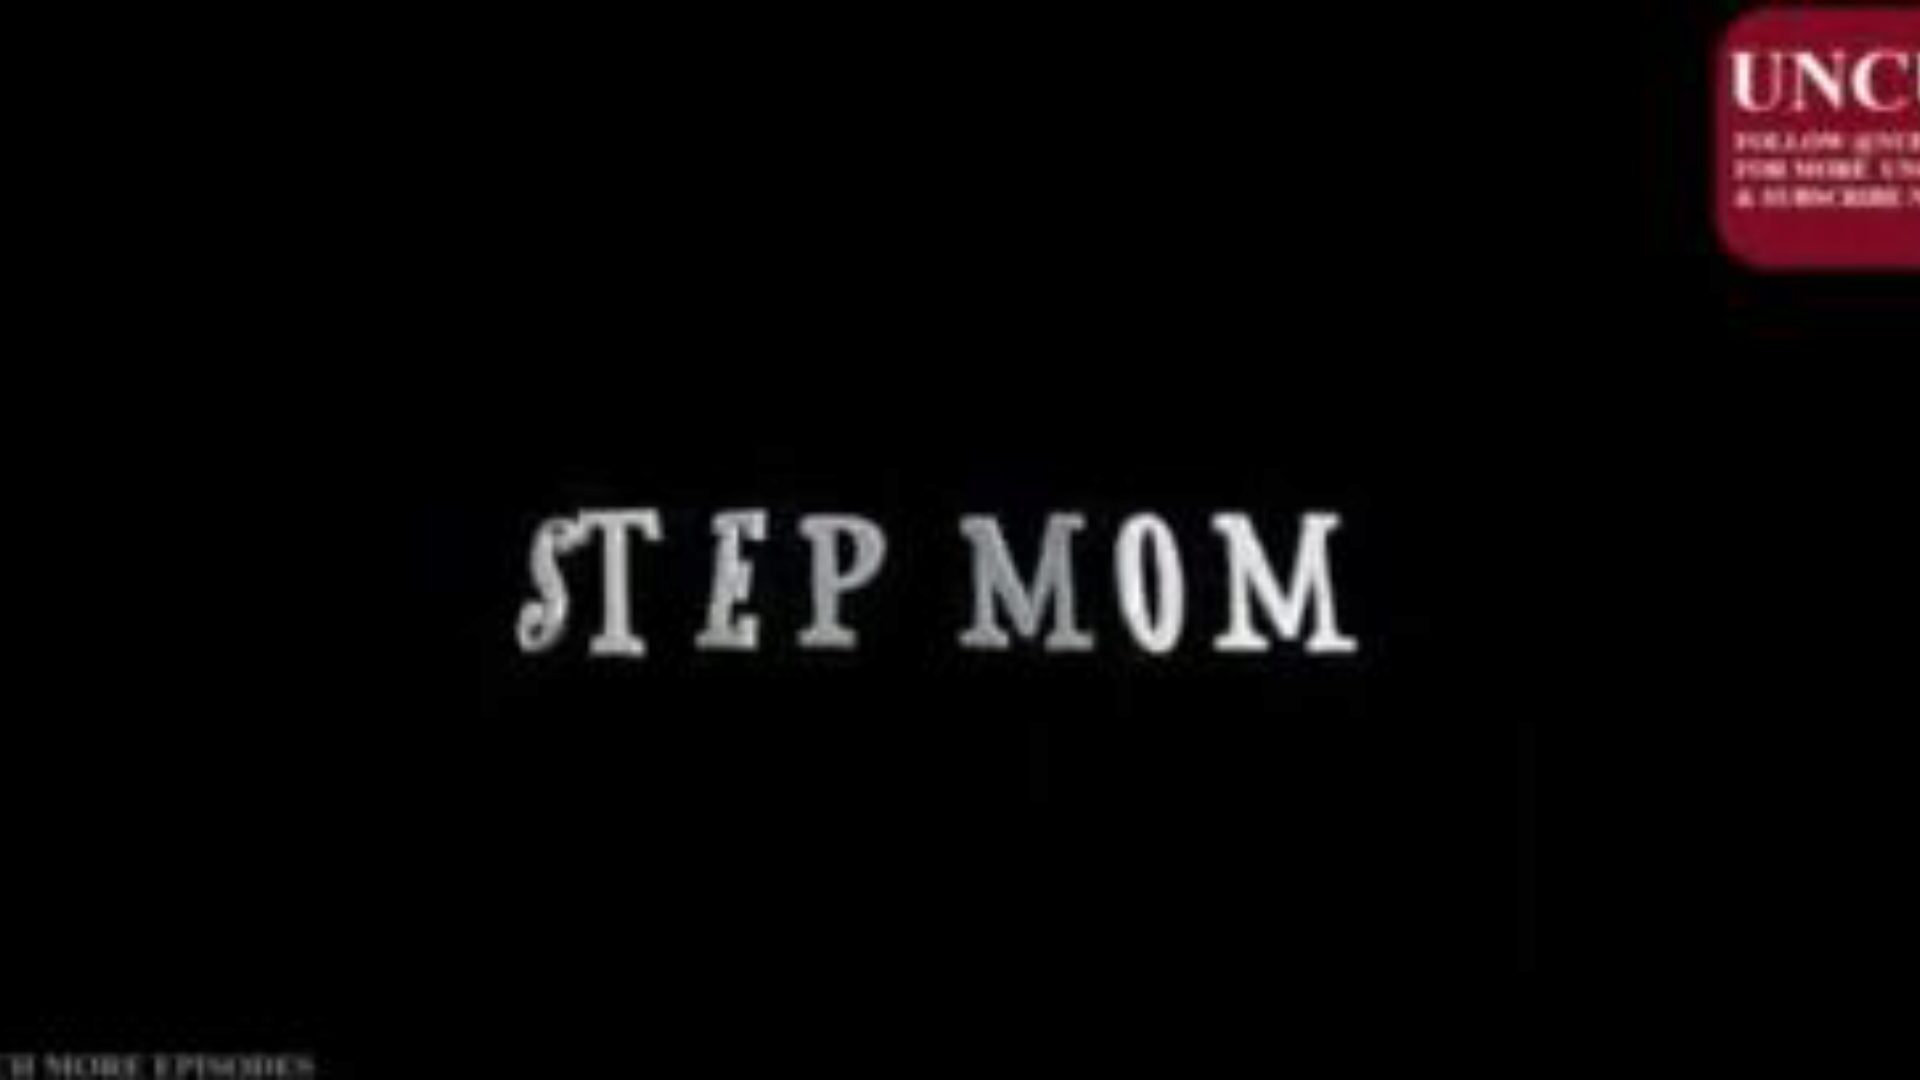 Hot Sex with Stepmom: Free Indian Porn Video b7 - xHamster Watch Hot Sex with Stepmom tube intercourse movie for free on xHamster, with the authoritative collection of Asian Indian, Mature & mother I'd like to fuck porno movie episodes